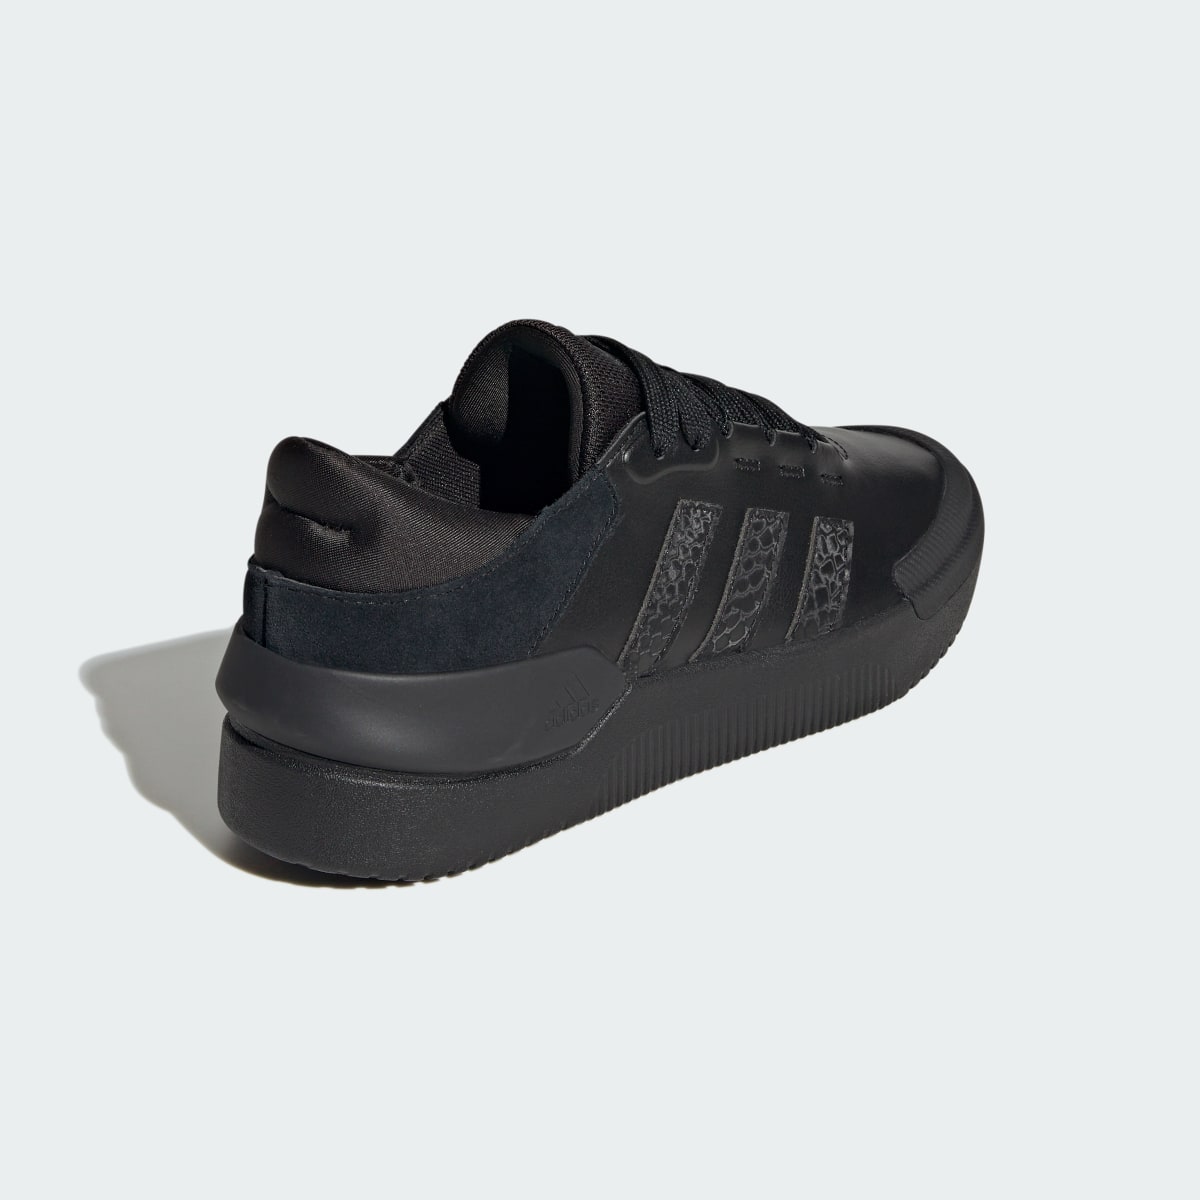 Adidas Court Funk Shoes. 6